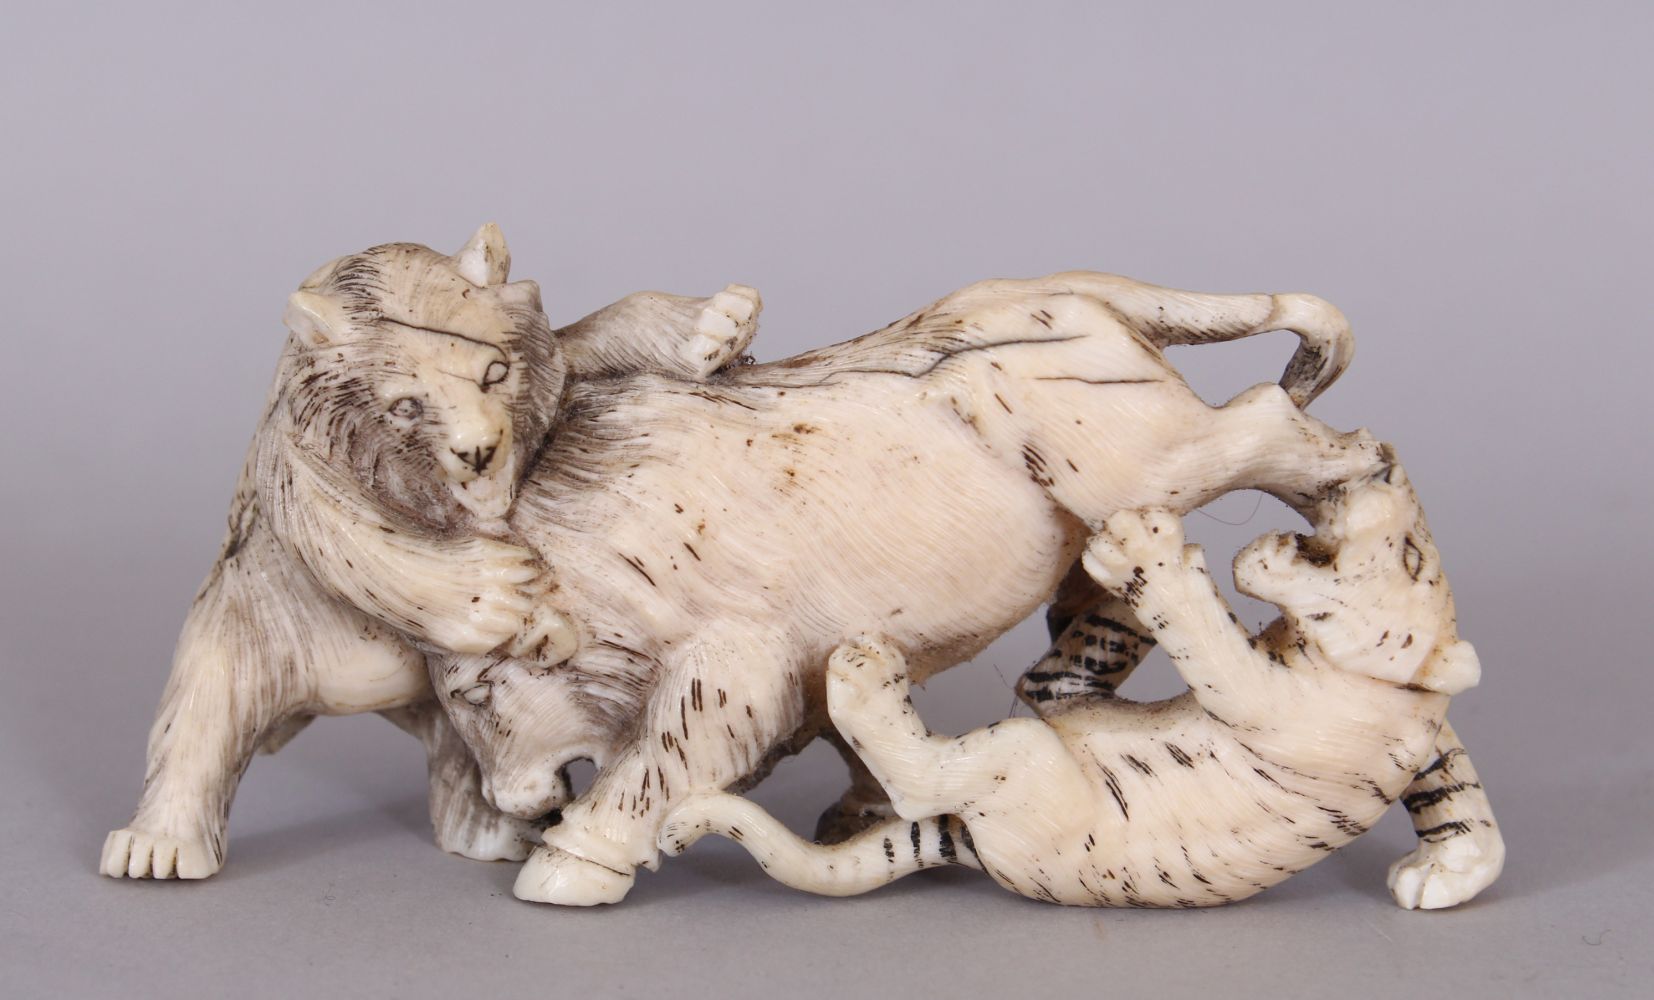 A JAPANESE MEIJI PERIOD IVORY OKIMONO OF A BEAR & A TIGER ATTACKING A BOAR, the details